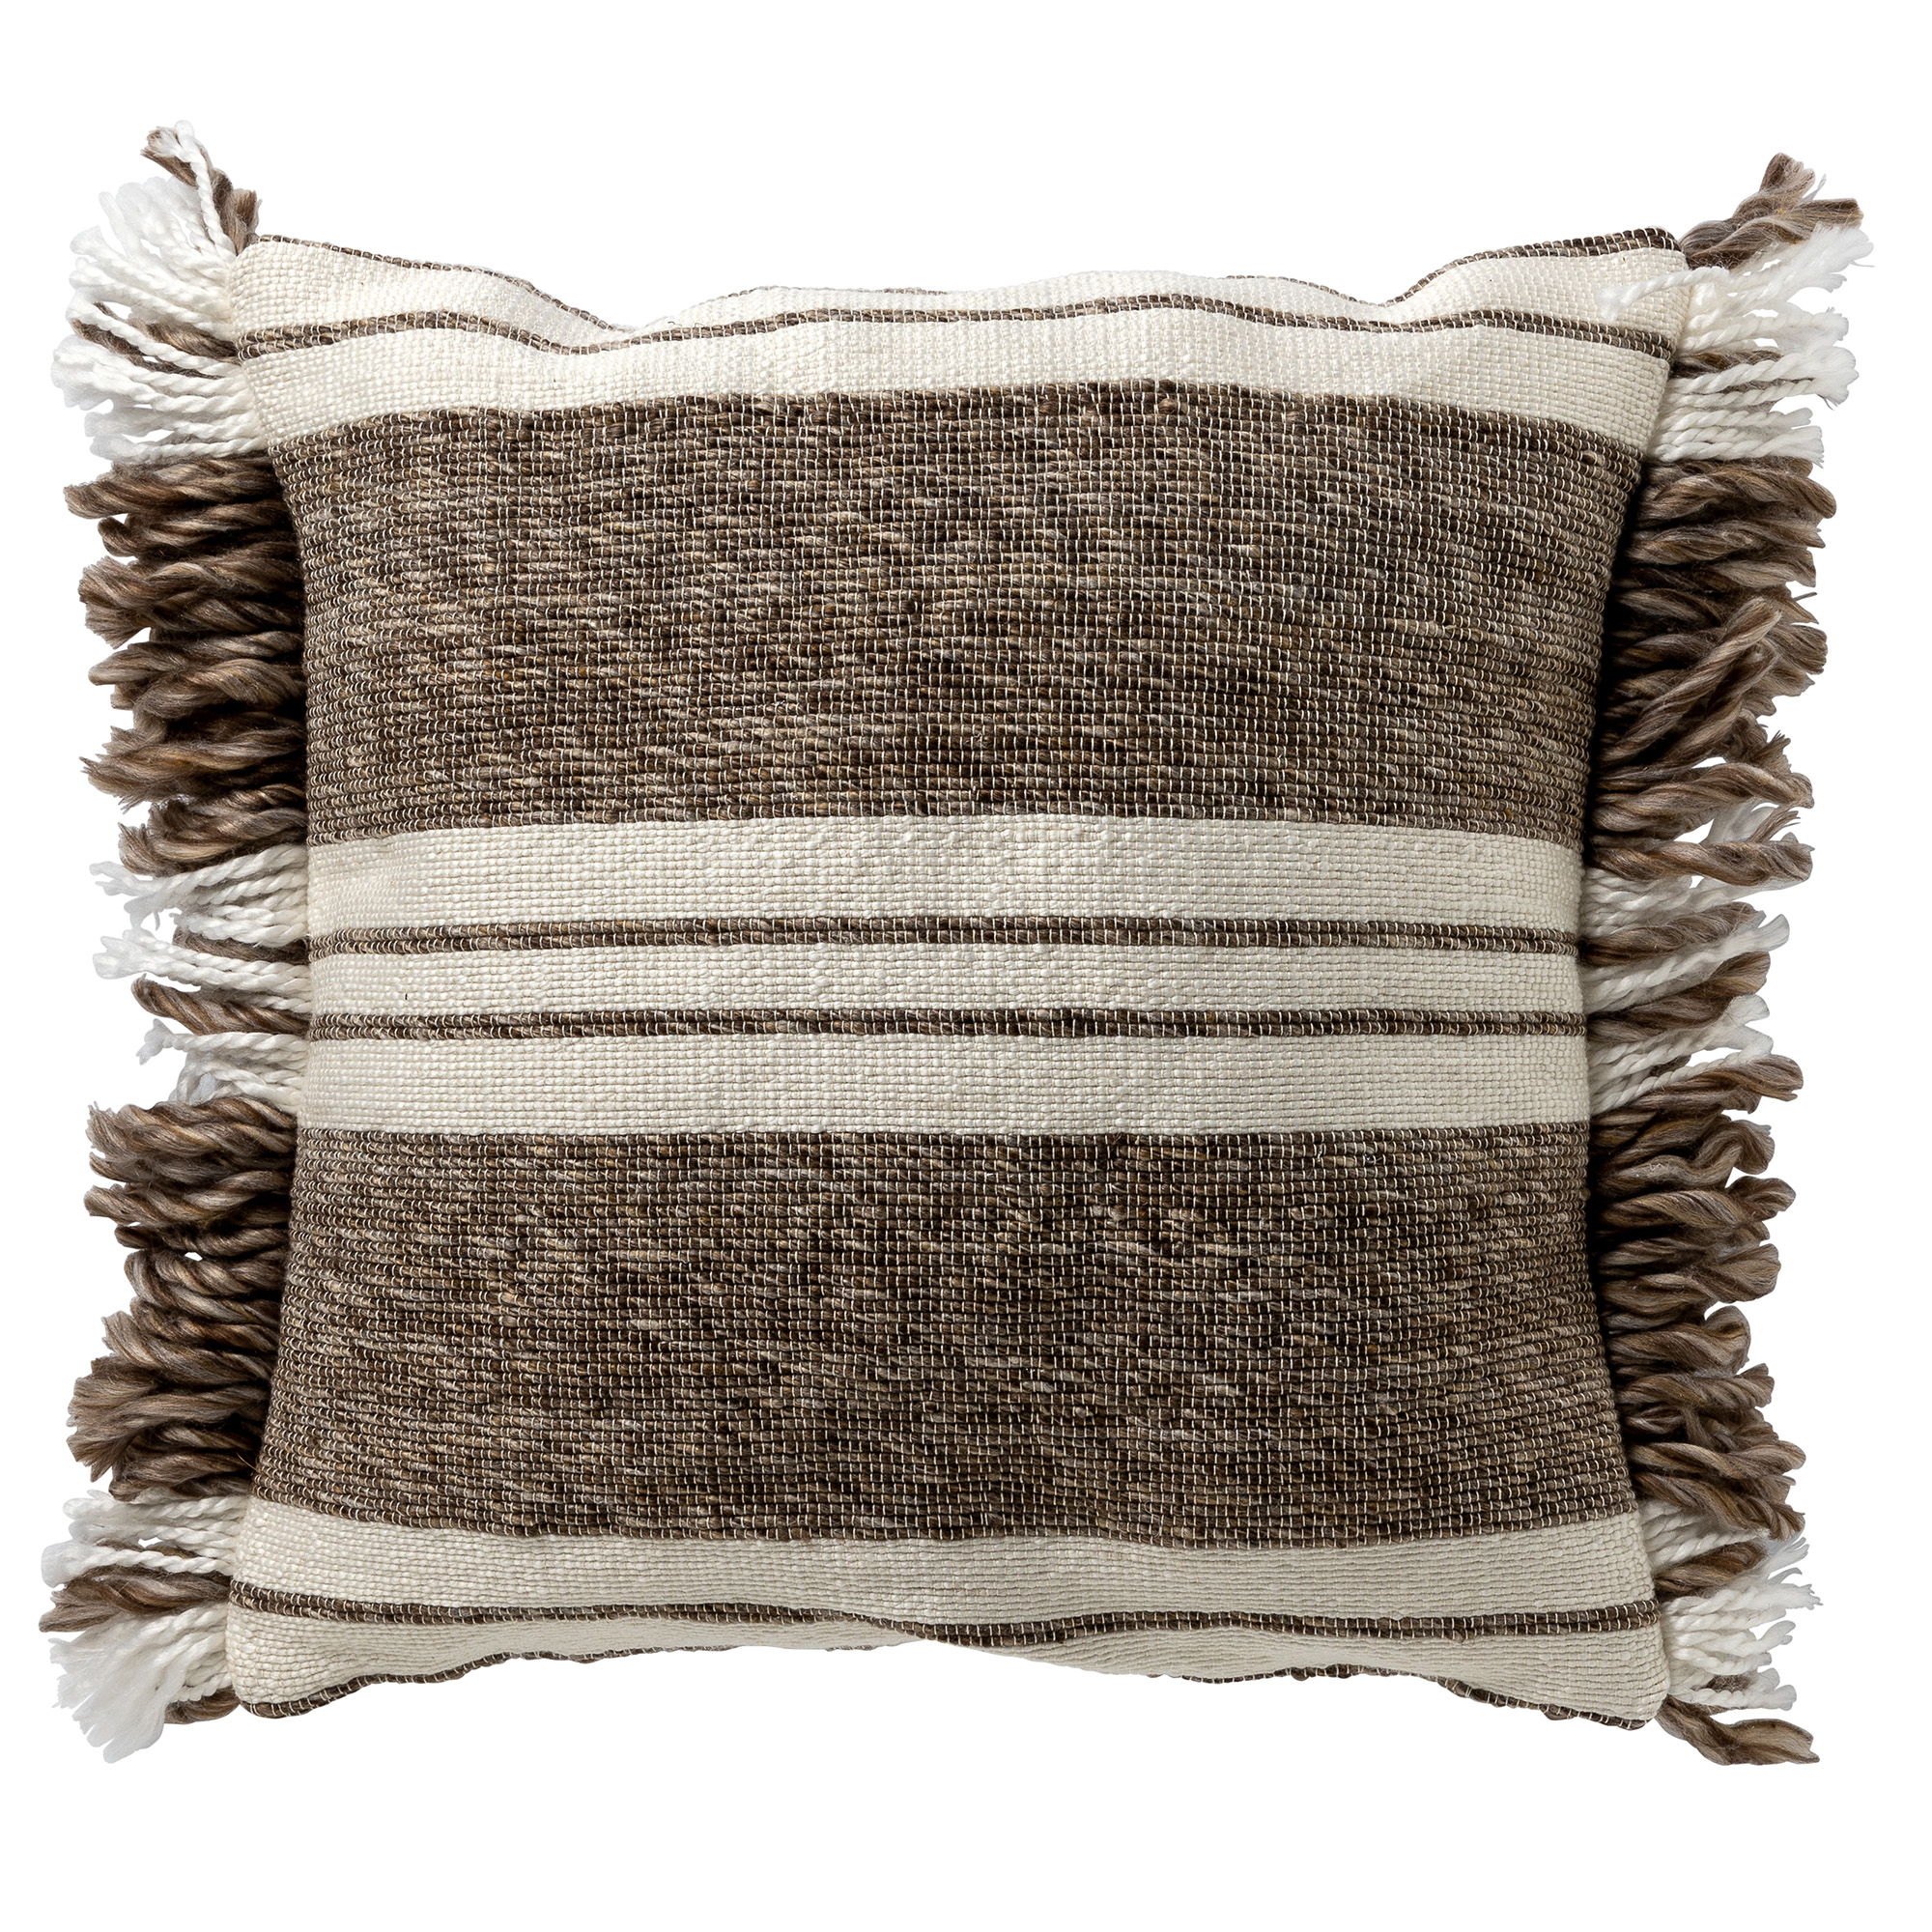 EDGAR - Kussenhoes 45x45 cm van 85% gerecycled polyester - streepdessin - Eco Line collectie - Driftwood - taupe 